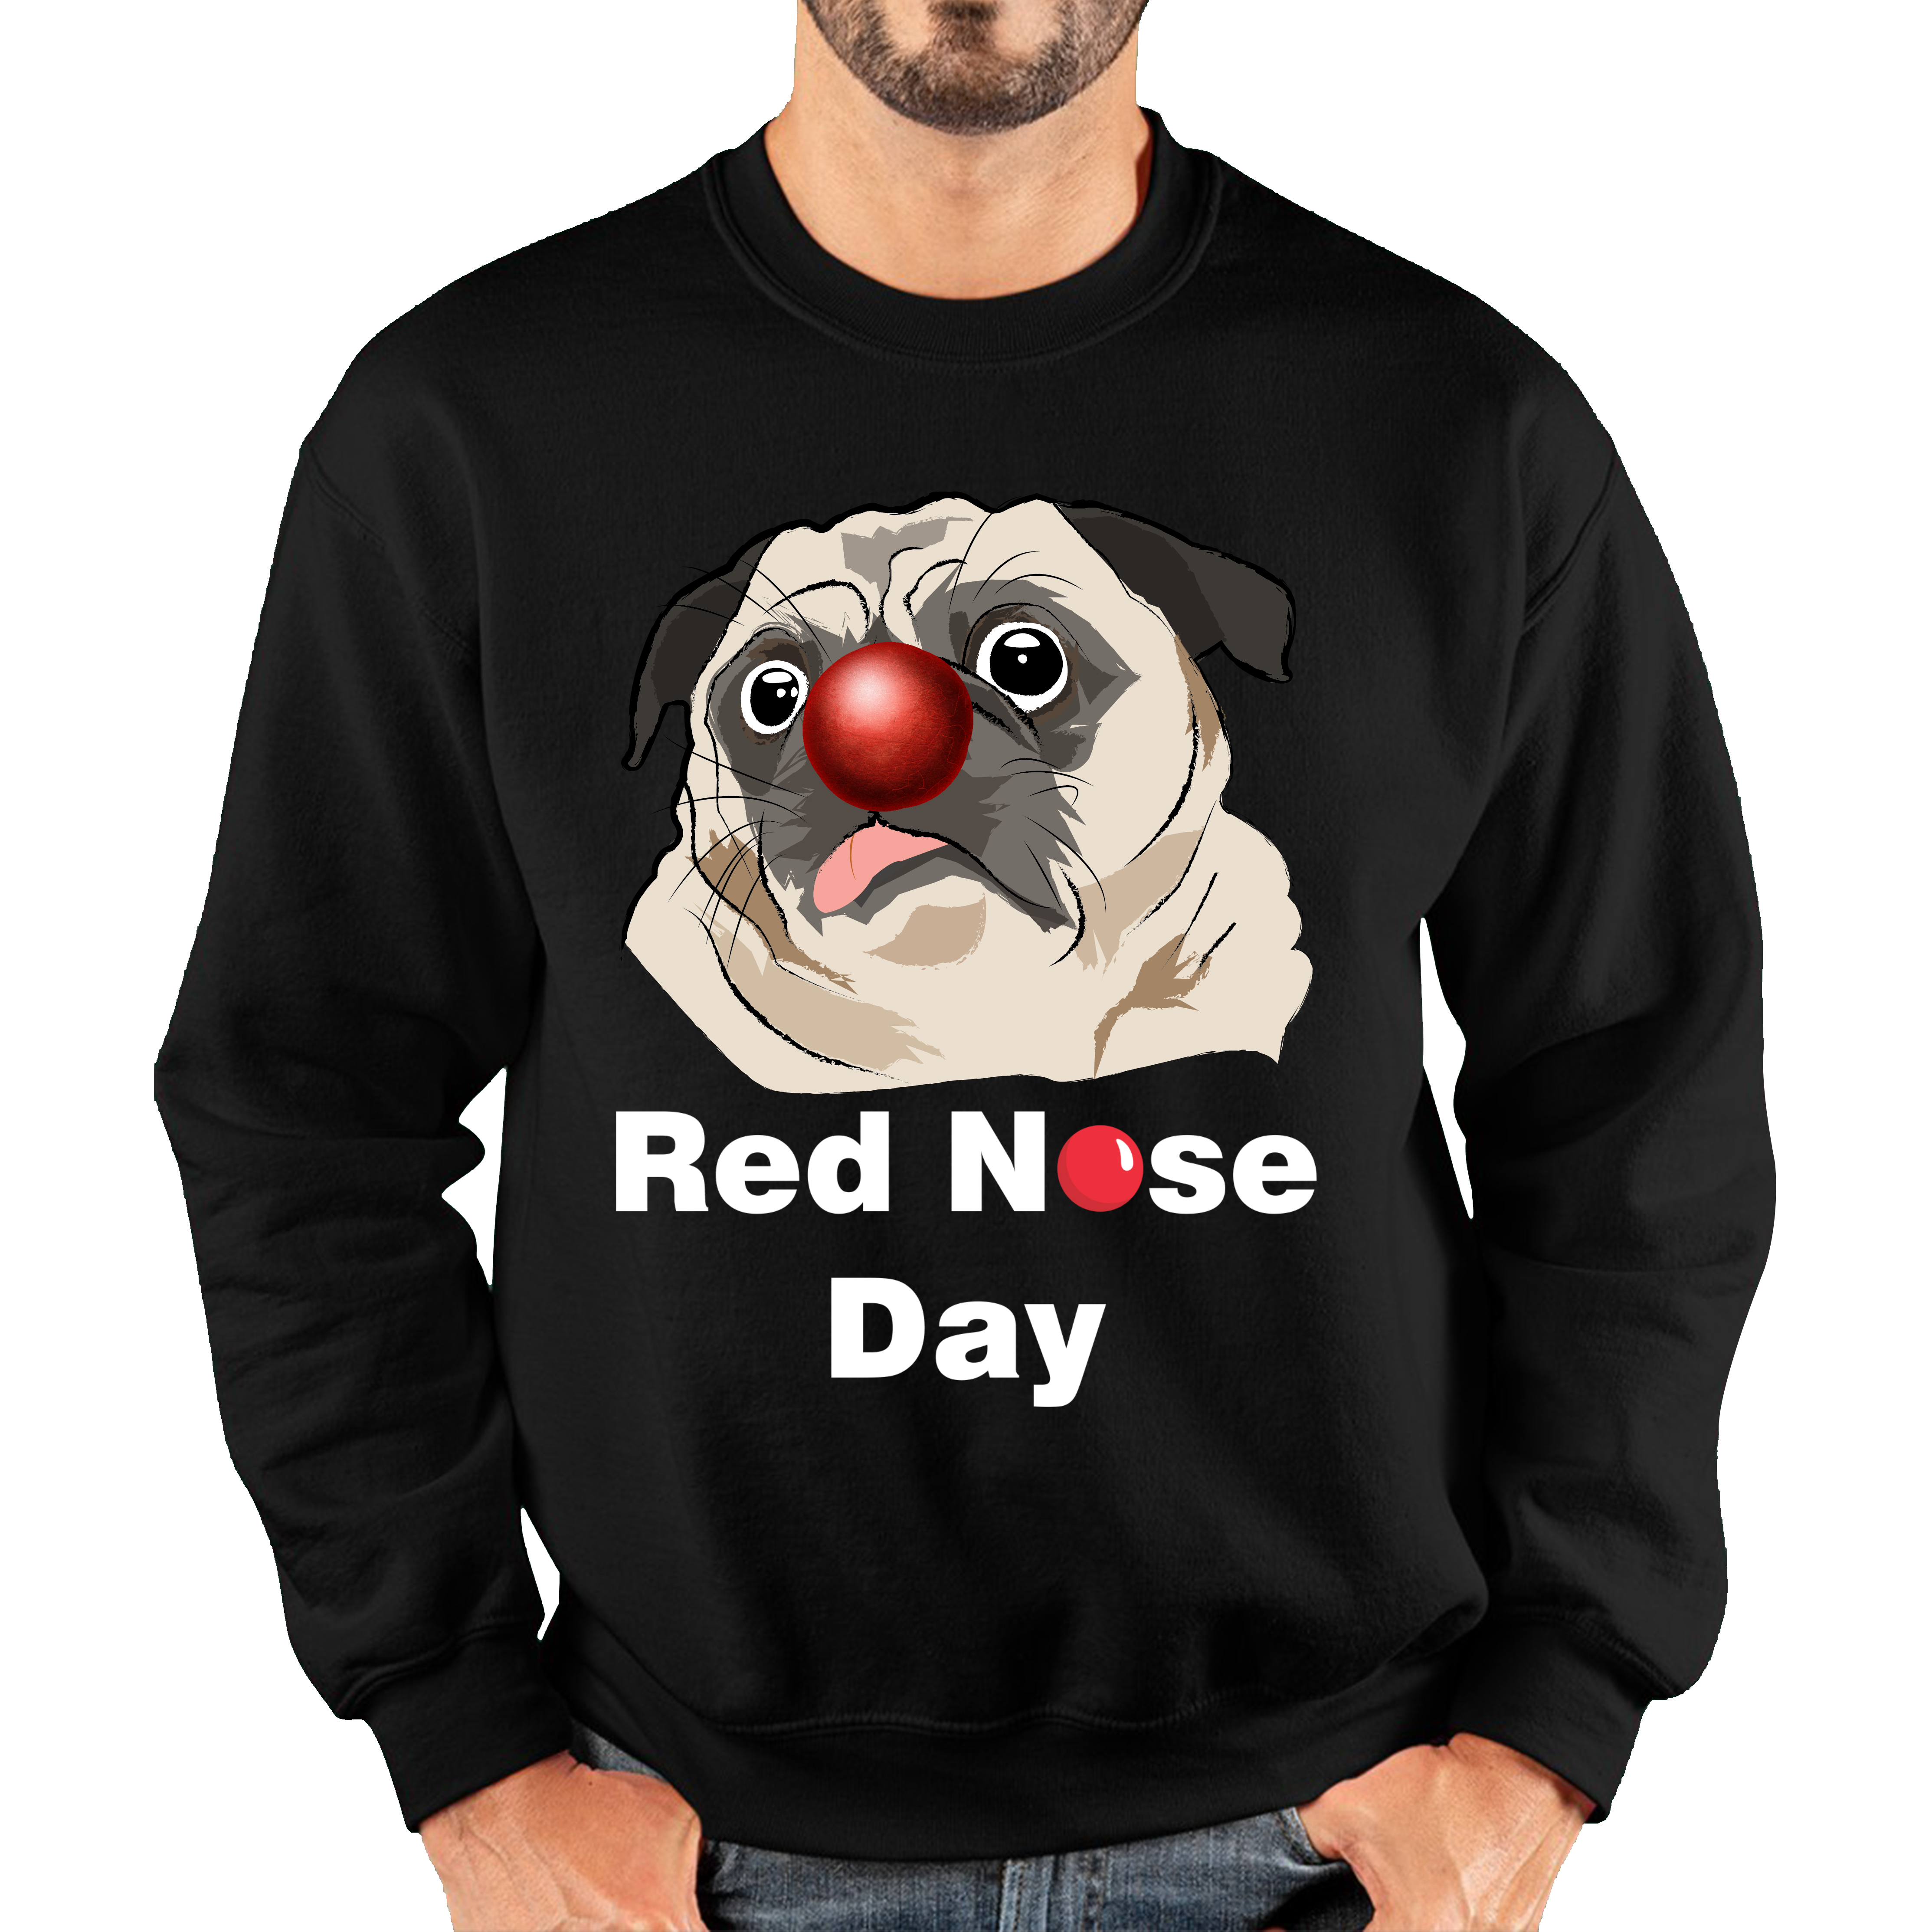 Pug Dog Red Nose Day Adult Sweatshirt. 50% Goes To Charity